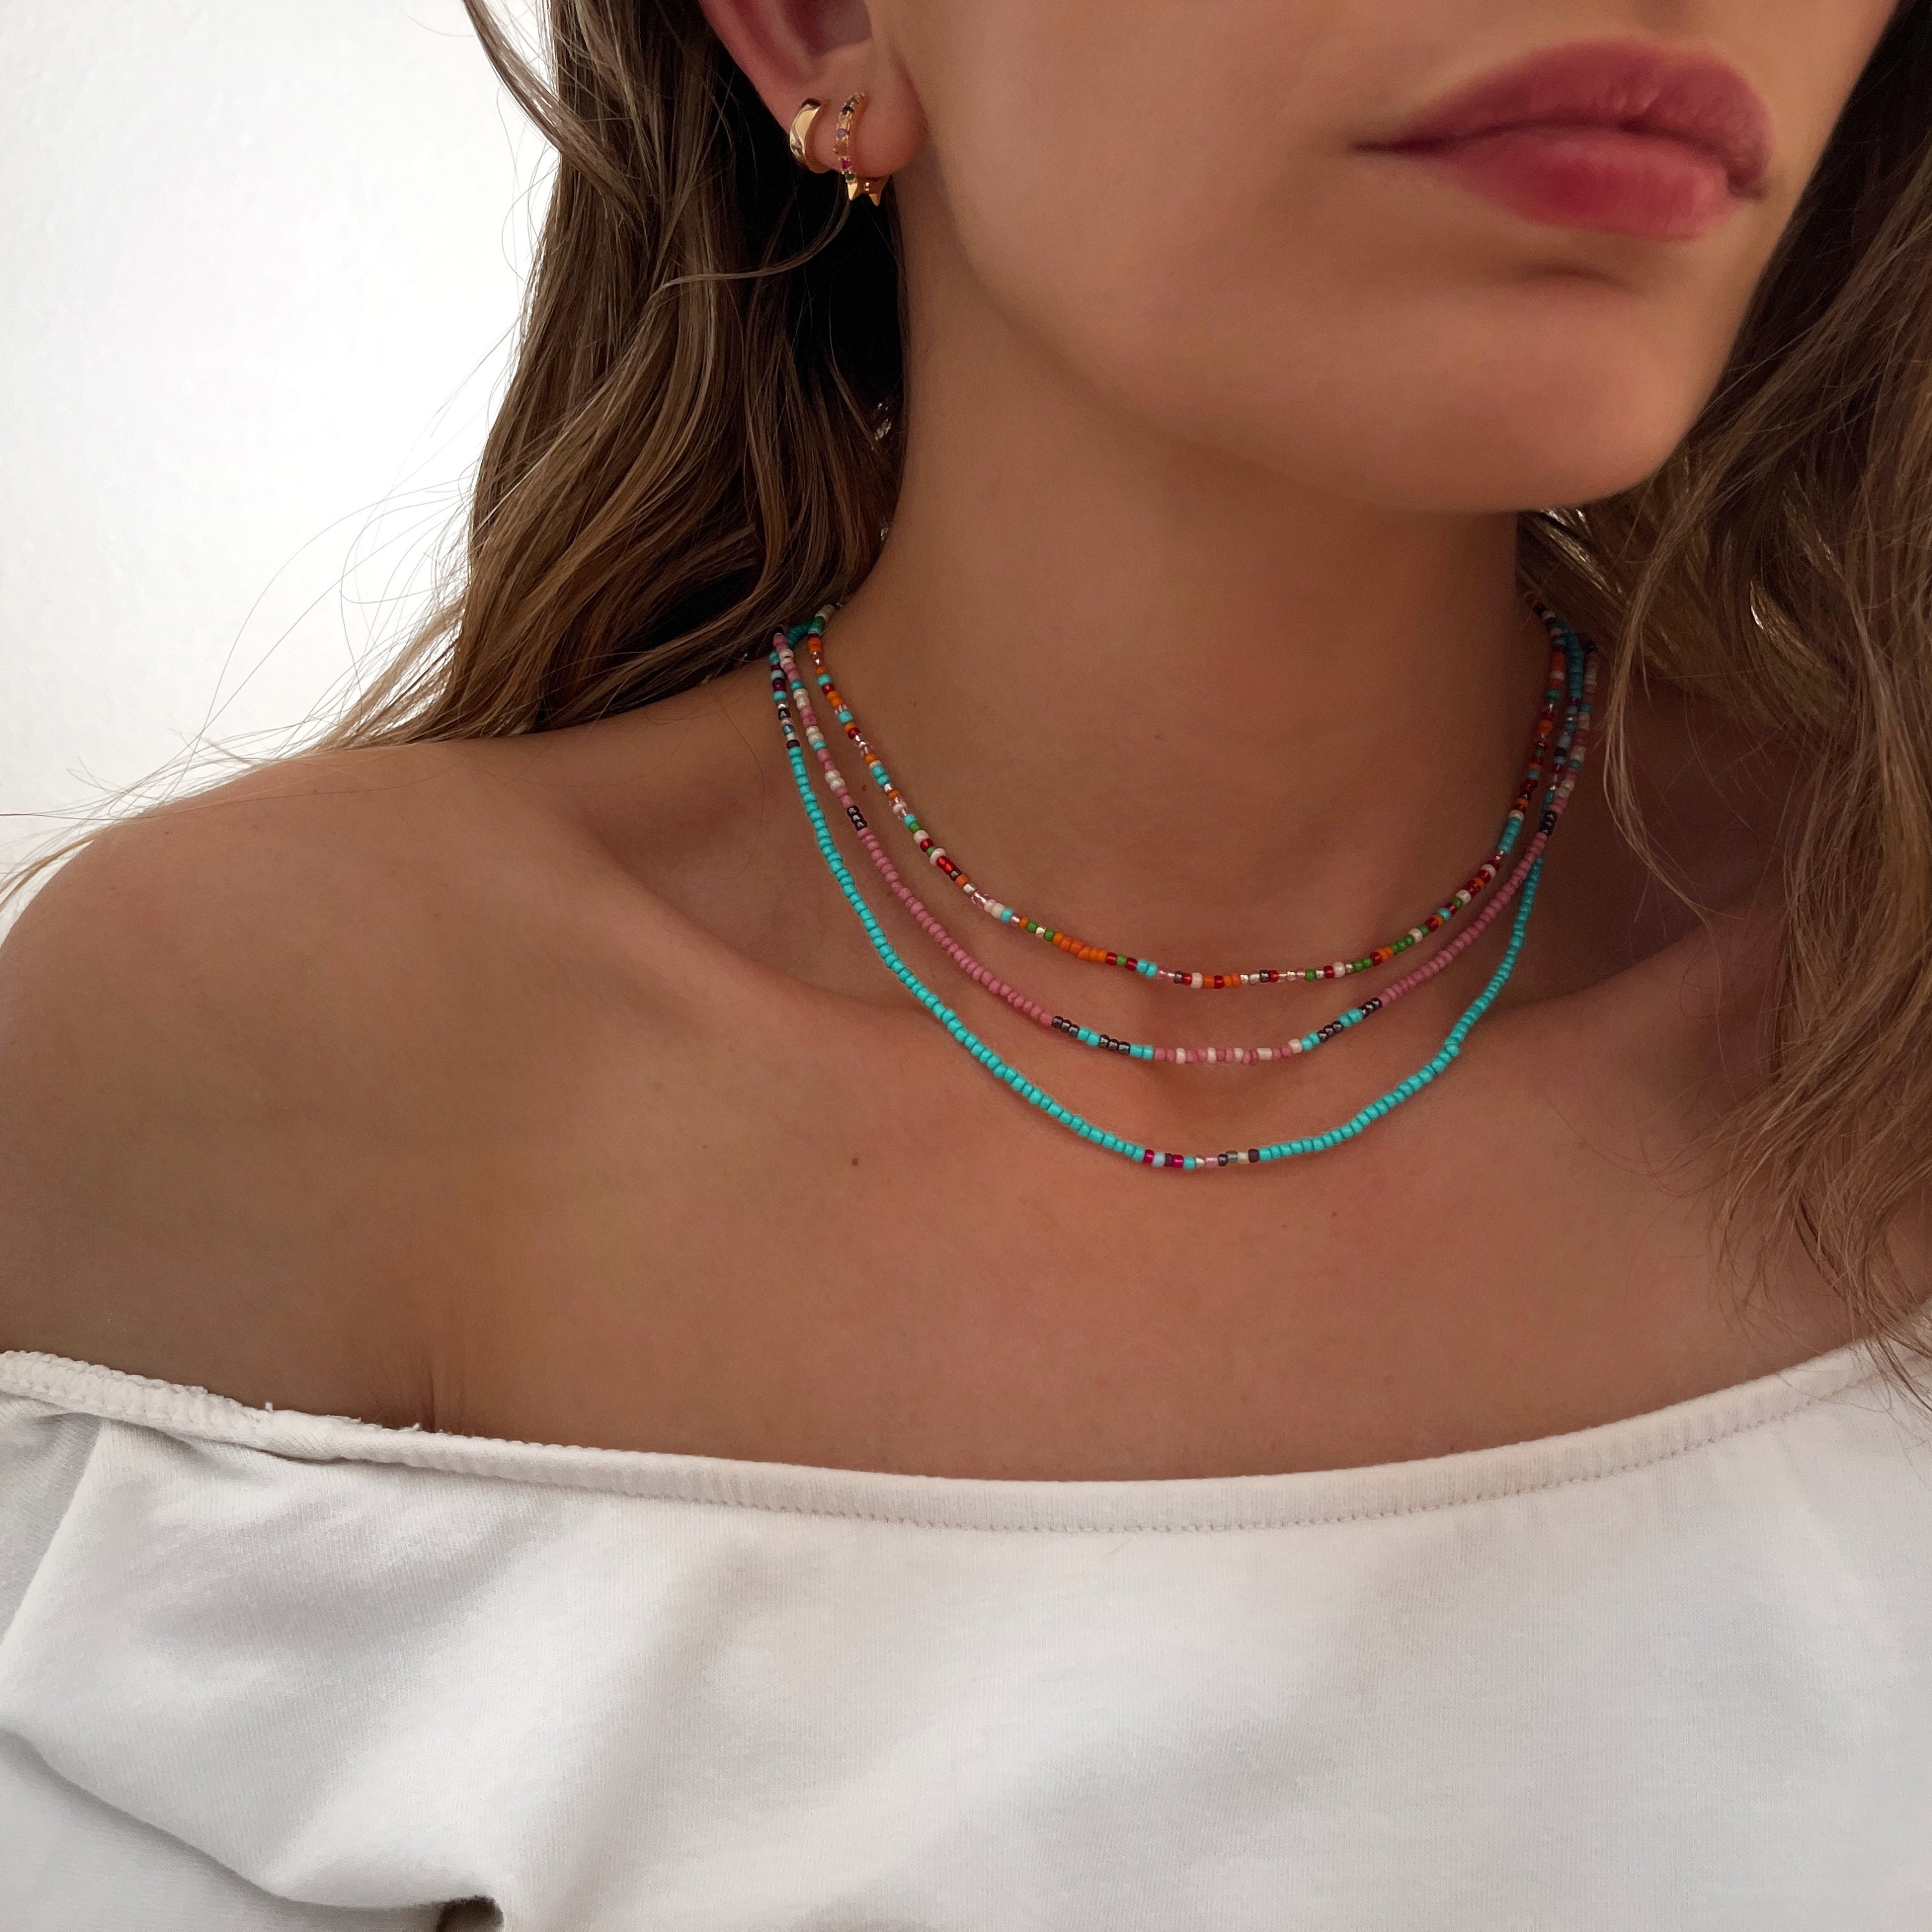 The summer-inspired necklace you can make yourself - GirlsLife